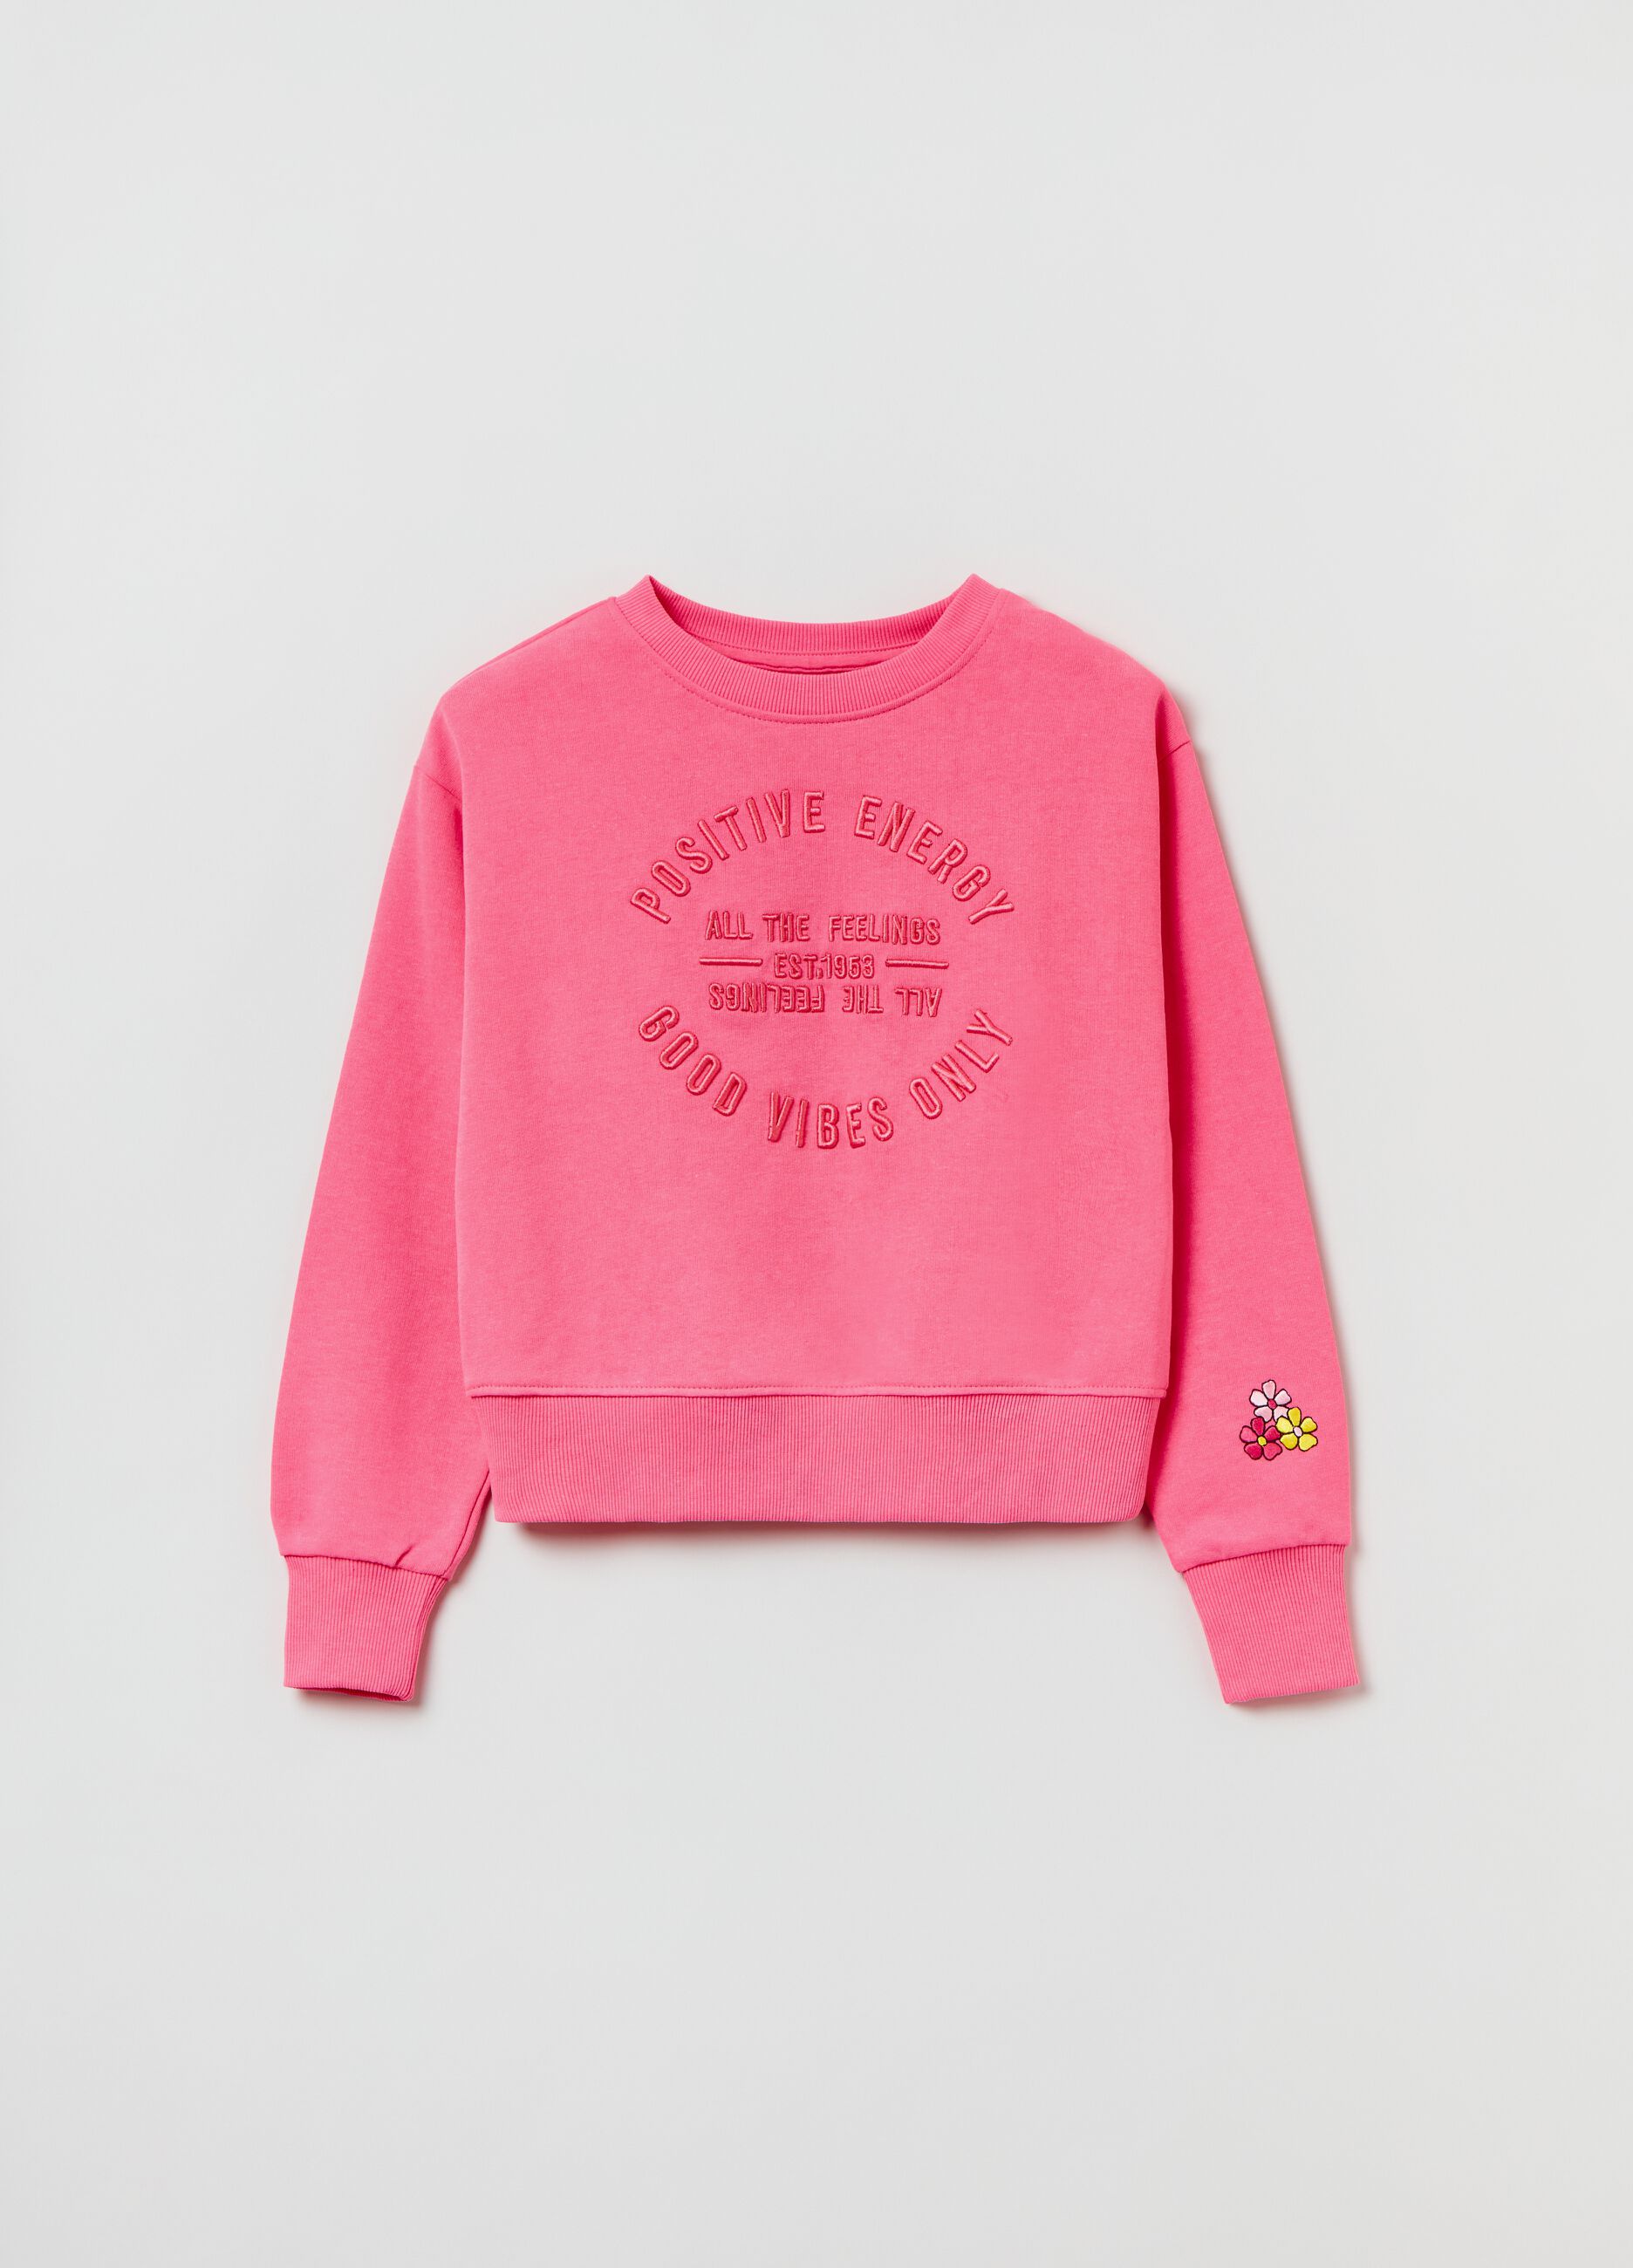 Sweatshirt with round neck and embroidered lettering.